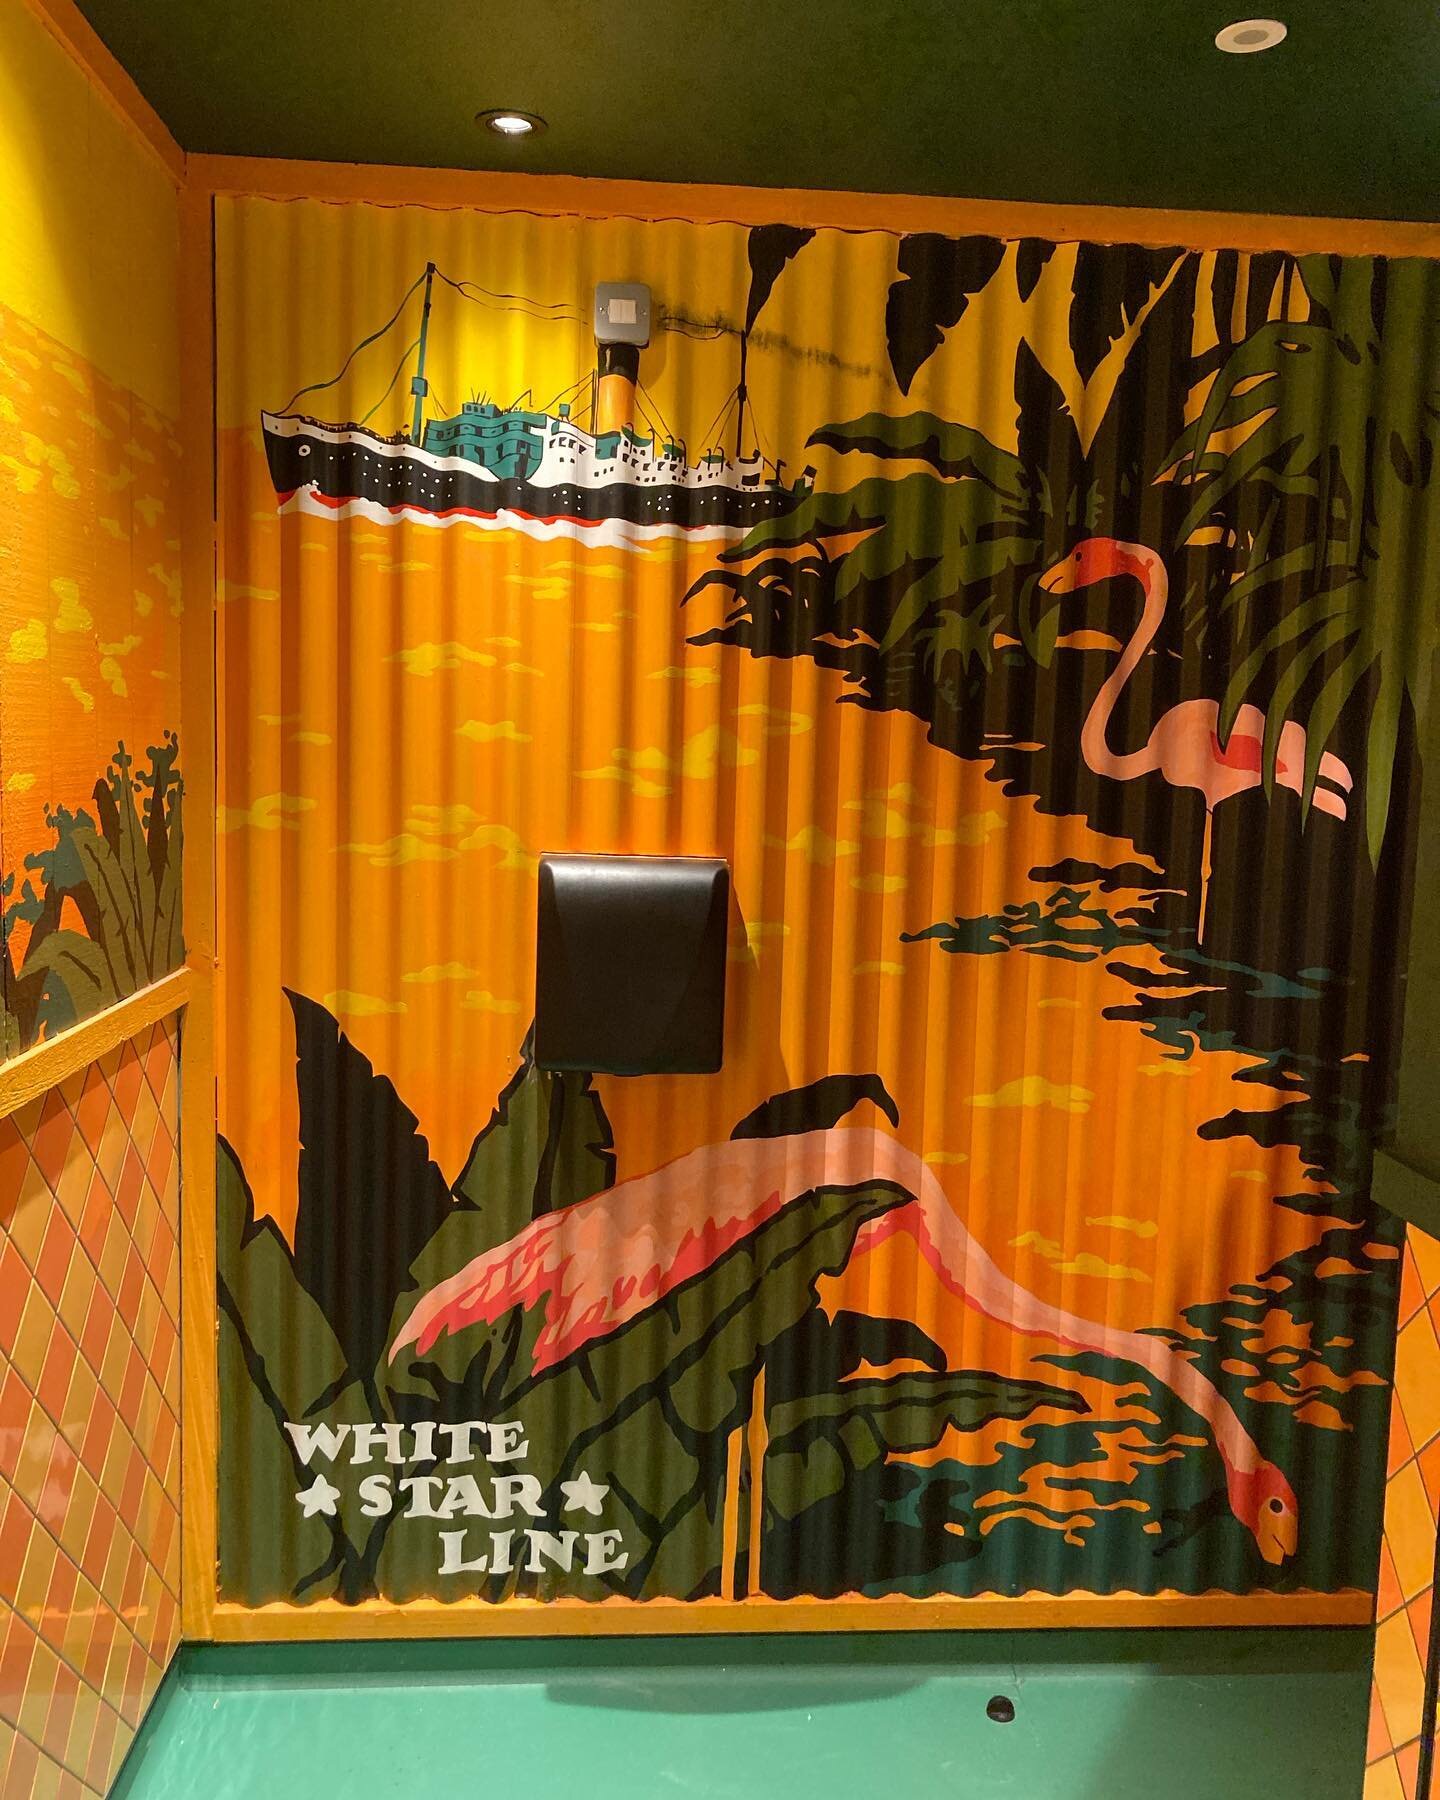 Some recent work for @jacktierneyart and @turtlebayuk transforming corrugated toilet walls into branded tropical paradise. 

Despite how it looks recently, corrugated is a real pain to paint with brushes but, I appear to be a sucker for punishment. I